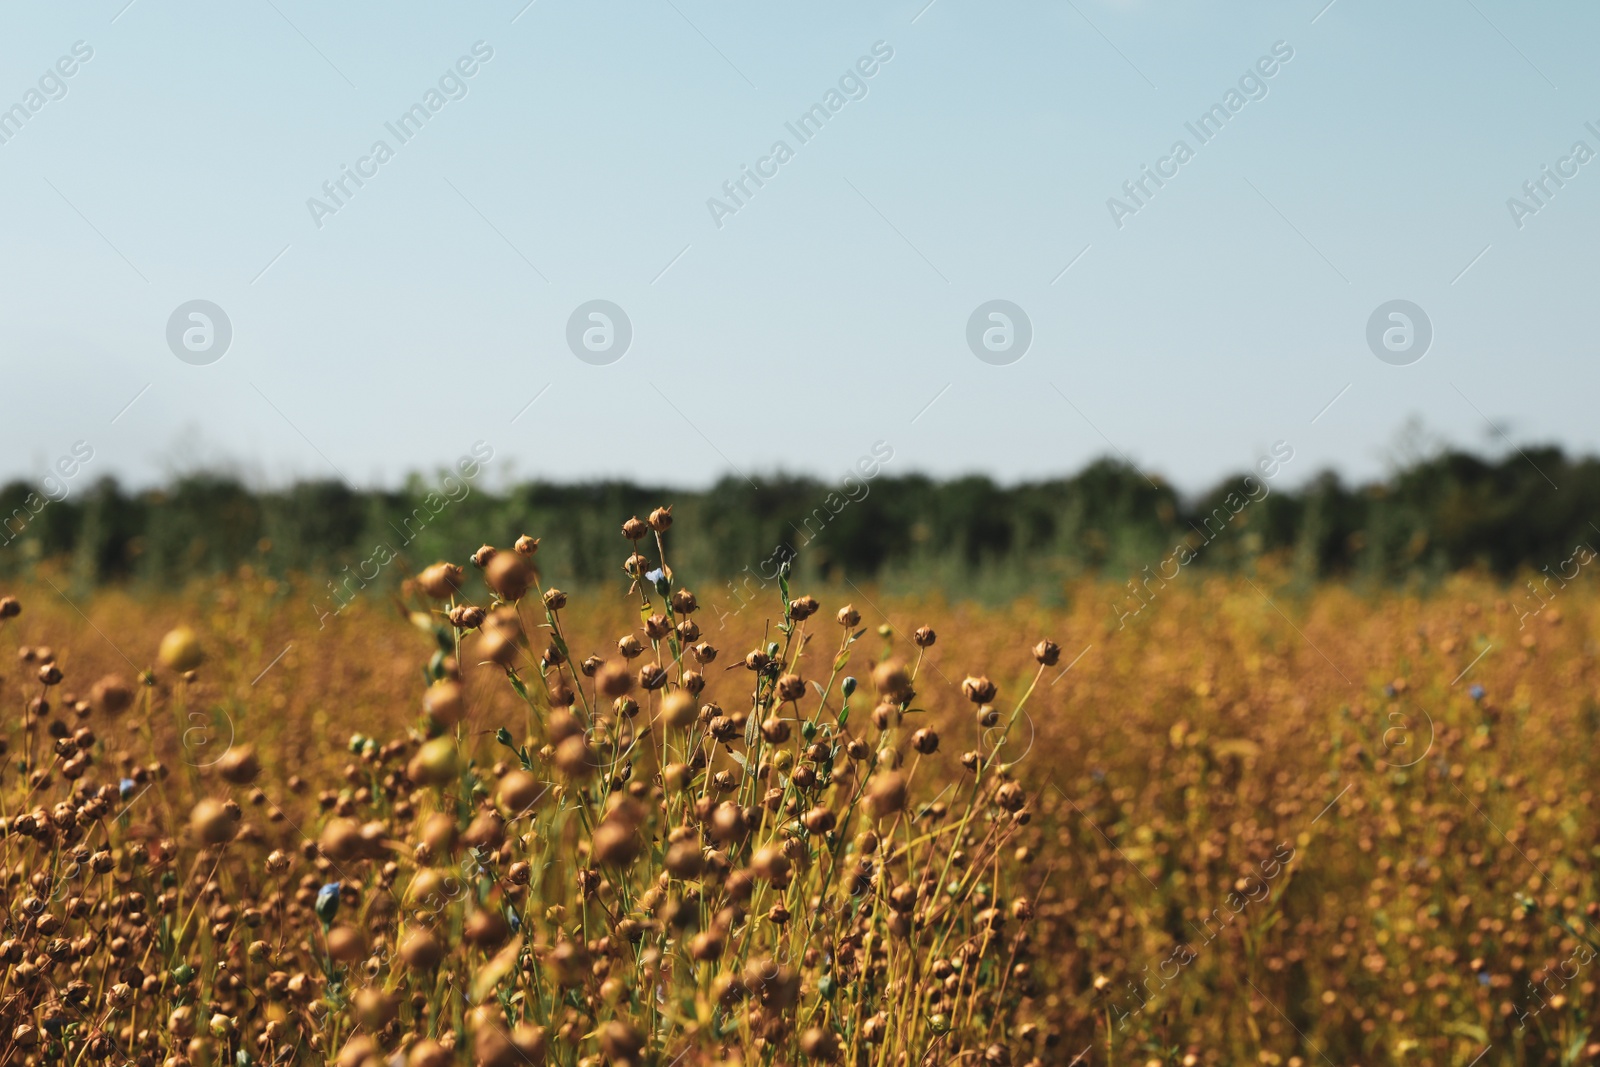 Photo of Beautiful flax plants with dry capsules in field on sunny day